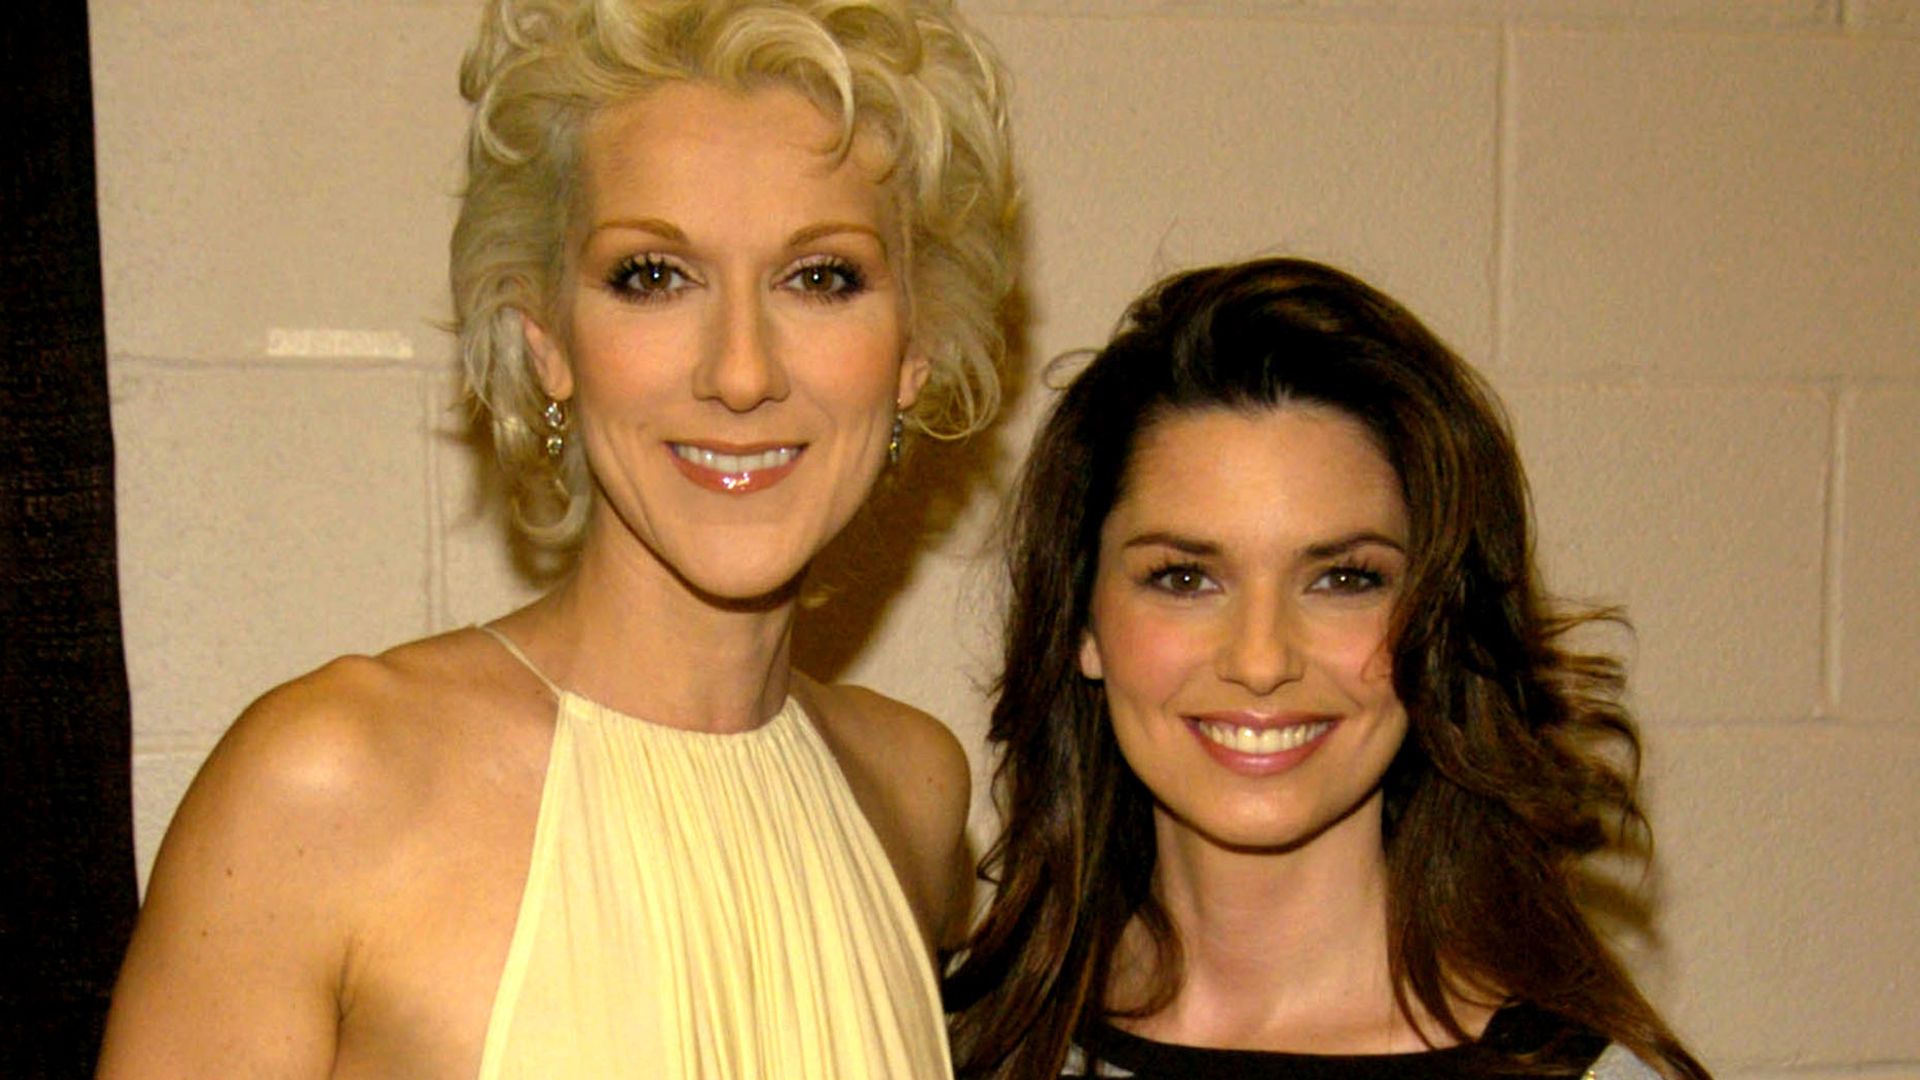 Celine Dion and Shania Twain stood smiling together